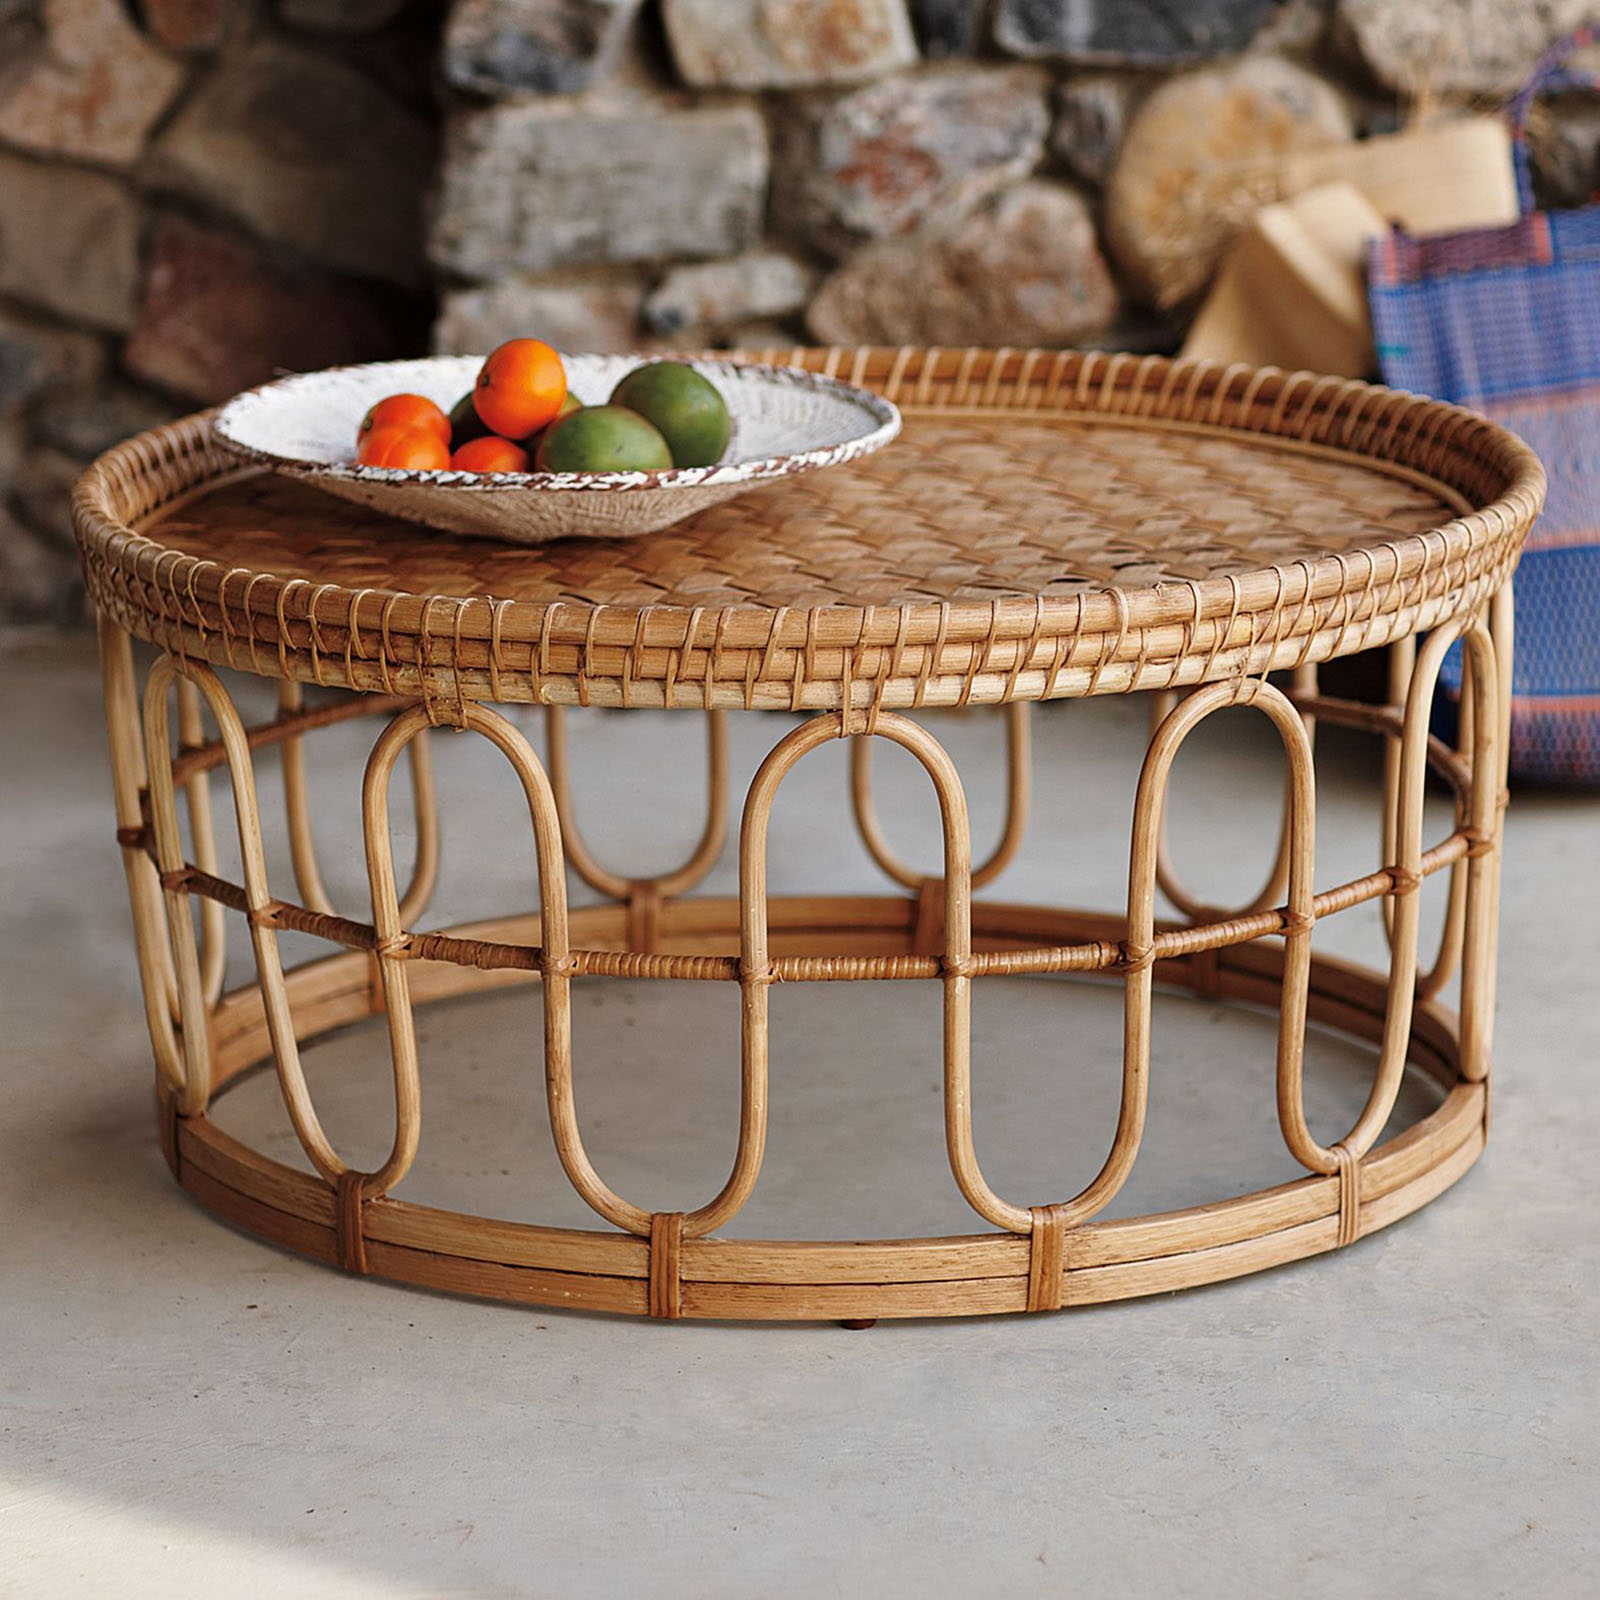 Bamboo coffee tables